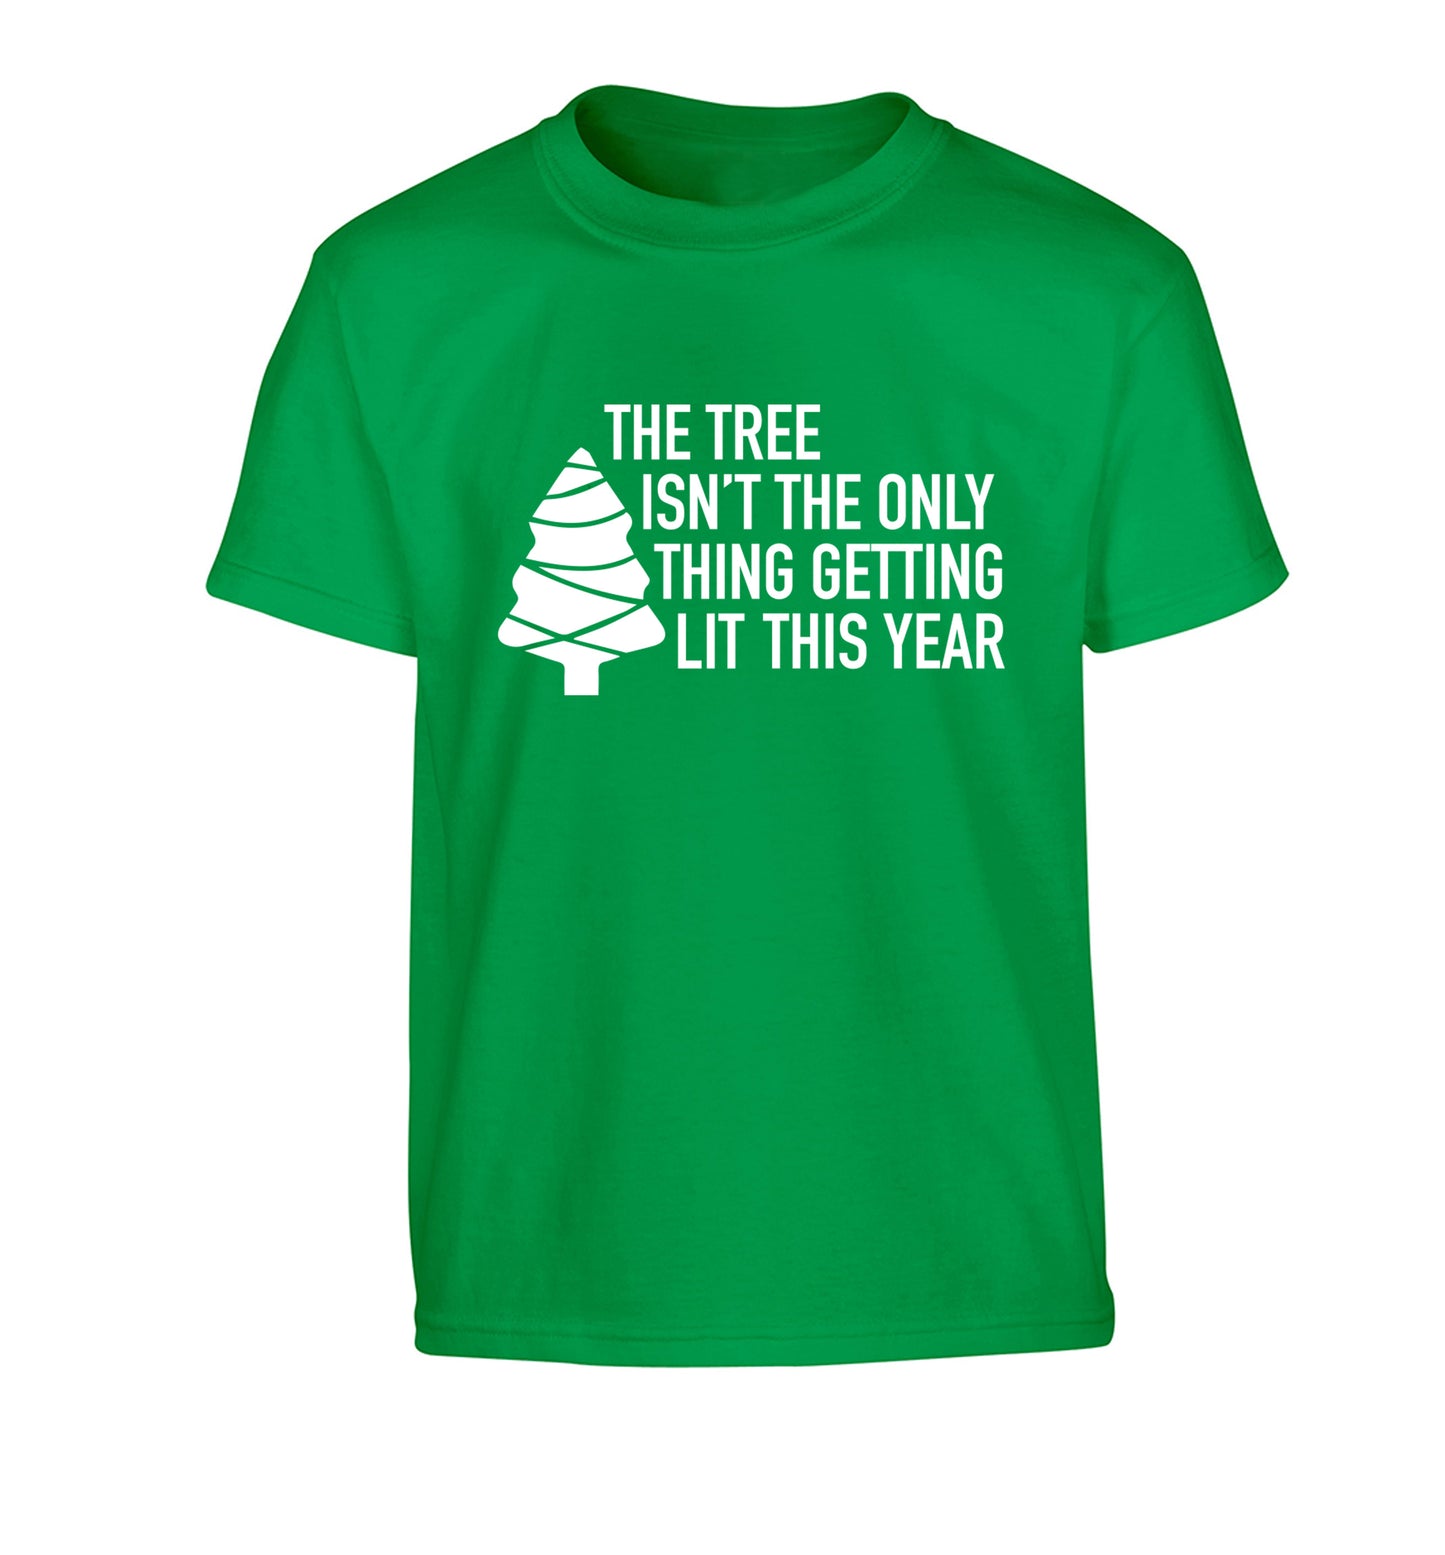 The tree isn't the only thing getting lit this year Children's green Tshirt 12-14 Years